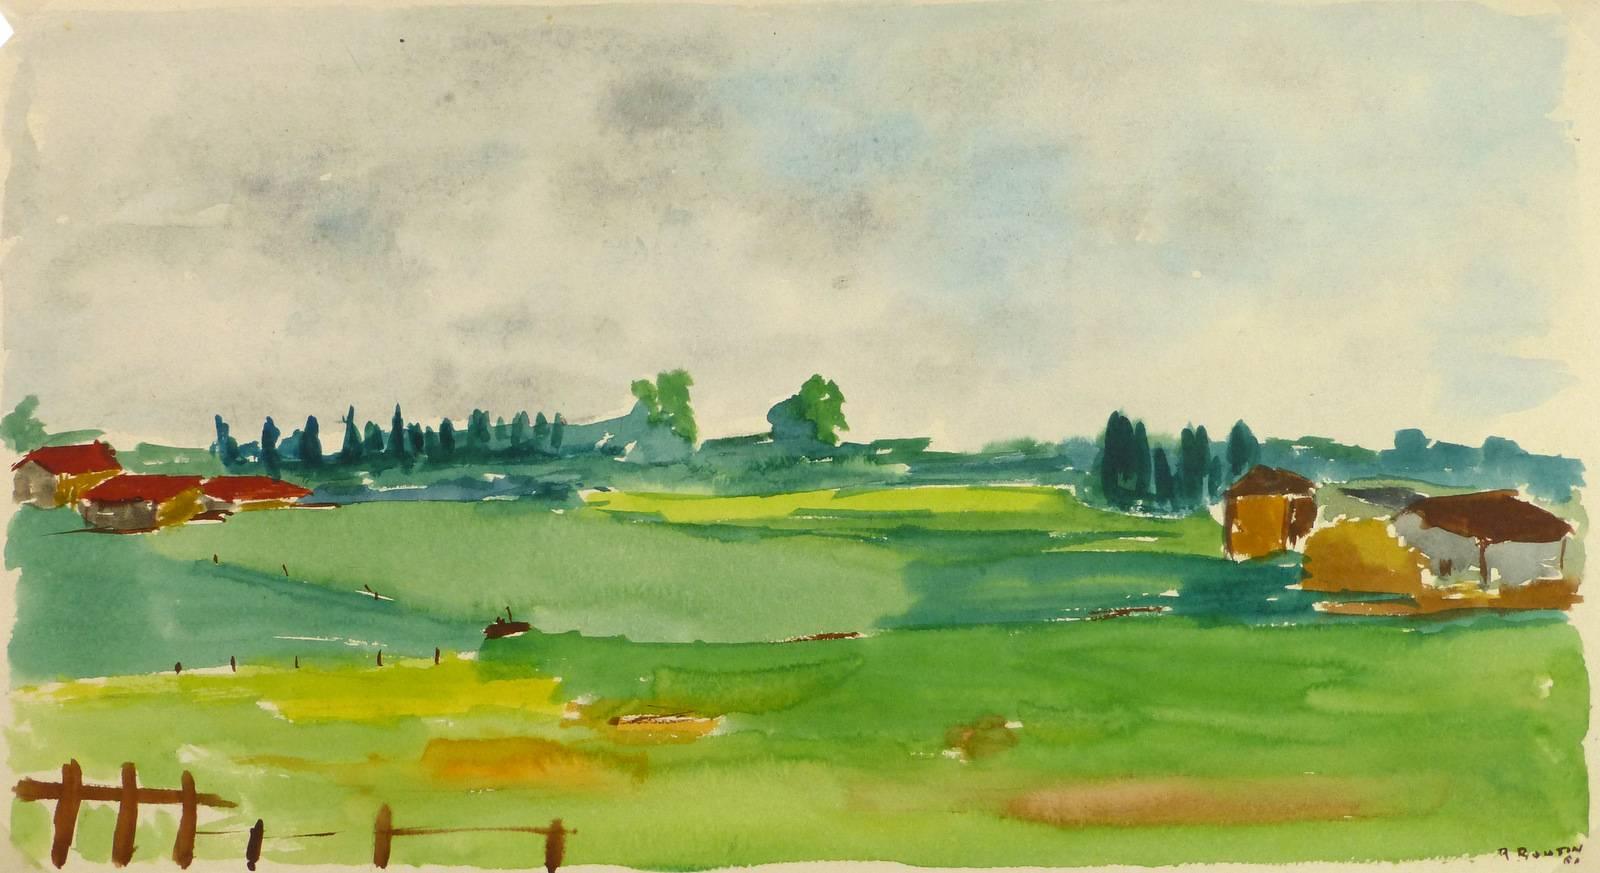 Unknown Landscape Art - Landscape Watercolor - Green Pasture with Country Homes